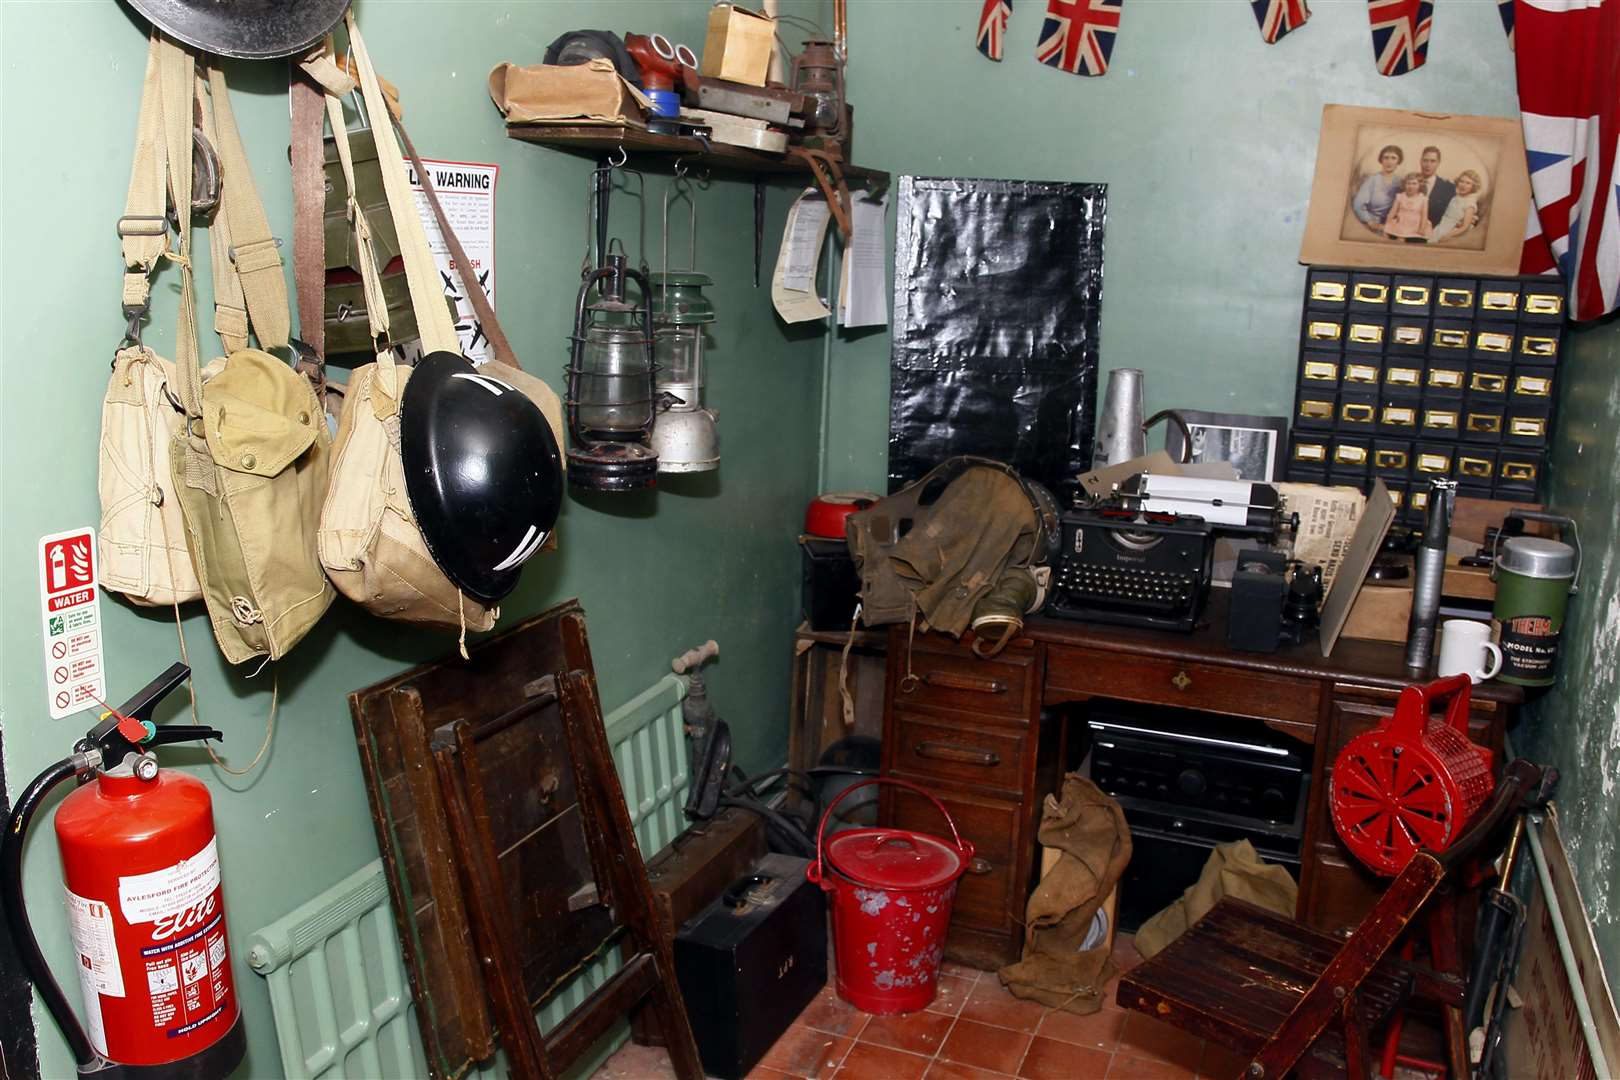 Step back in time during a visit to Sittingbourne's wartime house